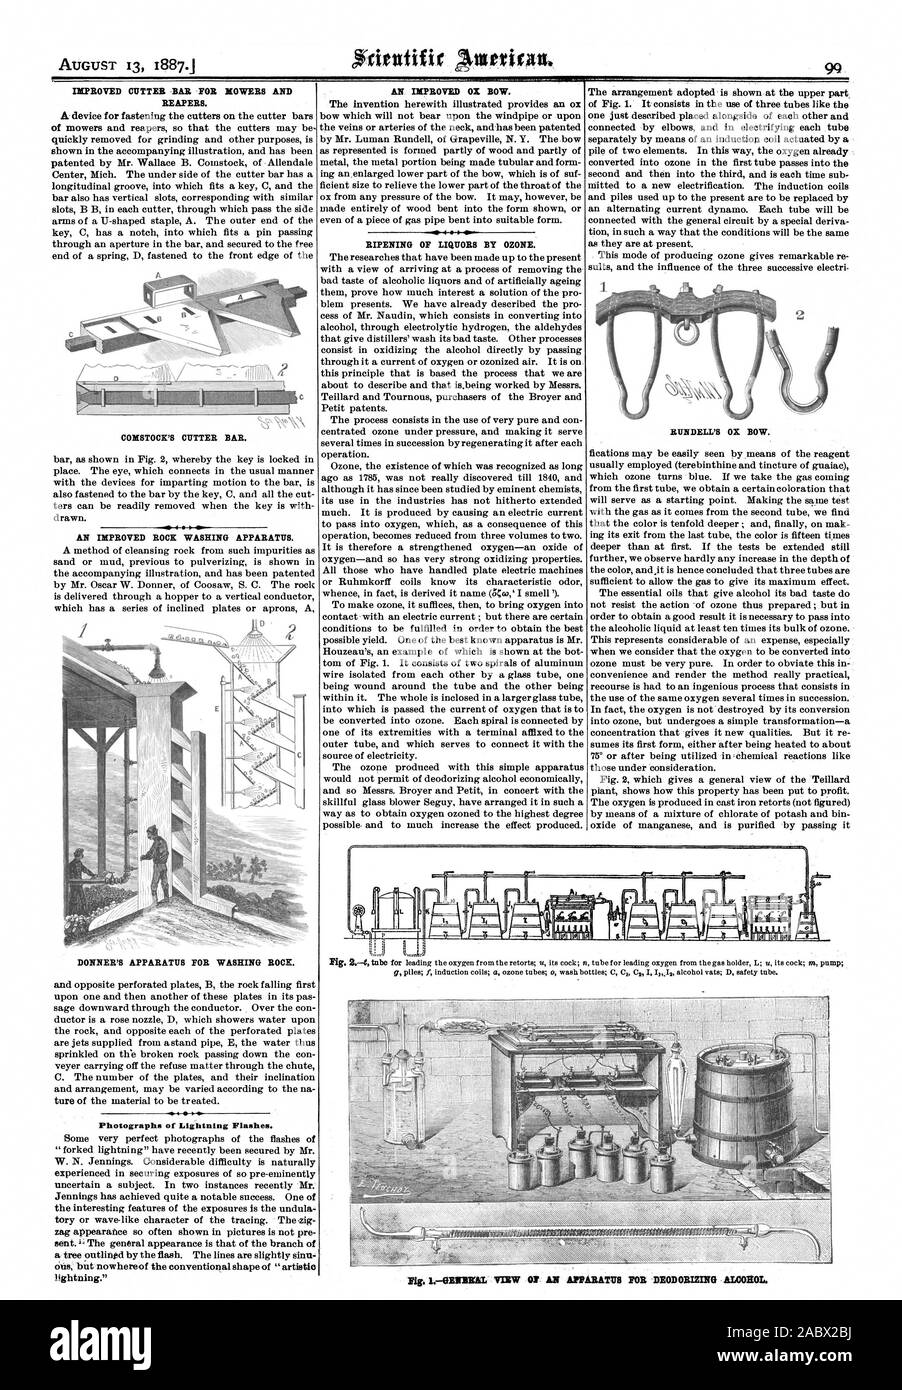 IMPROVED CUTTER BAR FOR MOWERS AND REAPERS. COMSTOCK'S CUTTER BAR. AN IMPROVED ROCK WASHING APPARATUS. DONNER'S APPARATUS FOR WASHING ROCK. AN IMPROVED OK BOW. RIPENING OF LIQUORS BY OZONE. RUNDELL'S OX BOW. Photographs of Lightning Flashes., scientific american, 1887-08-13 Stock Photo